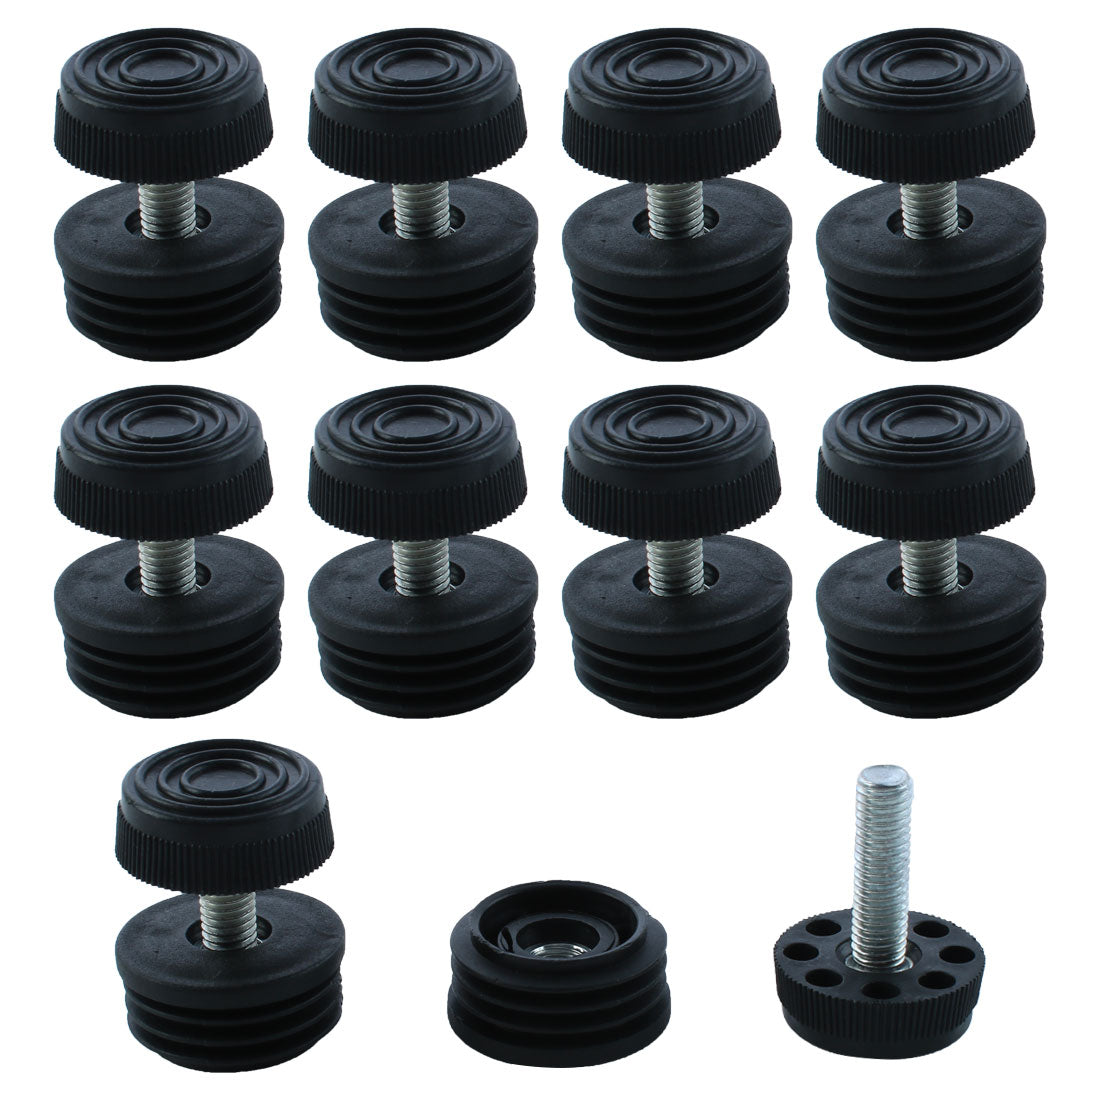 uxcell Uxcell Leveling Feet 1 1/4" 32mm OD Round Insert Furniture Glide Adjuster 10 Sets